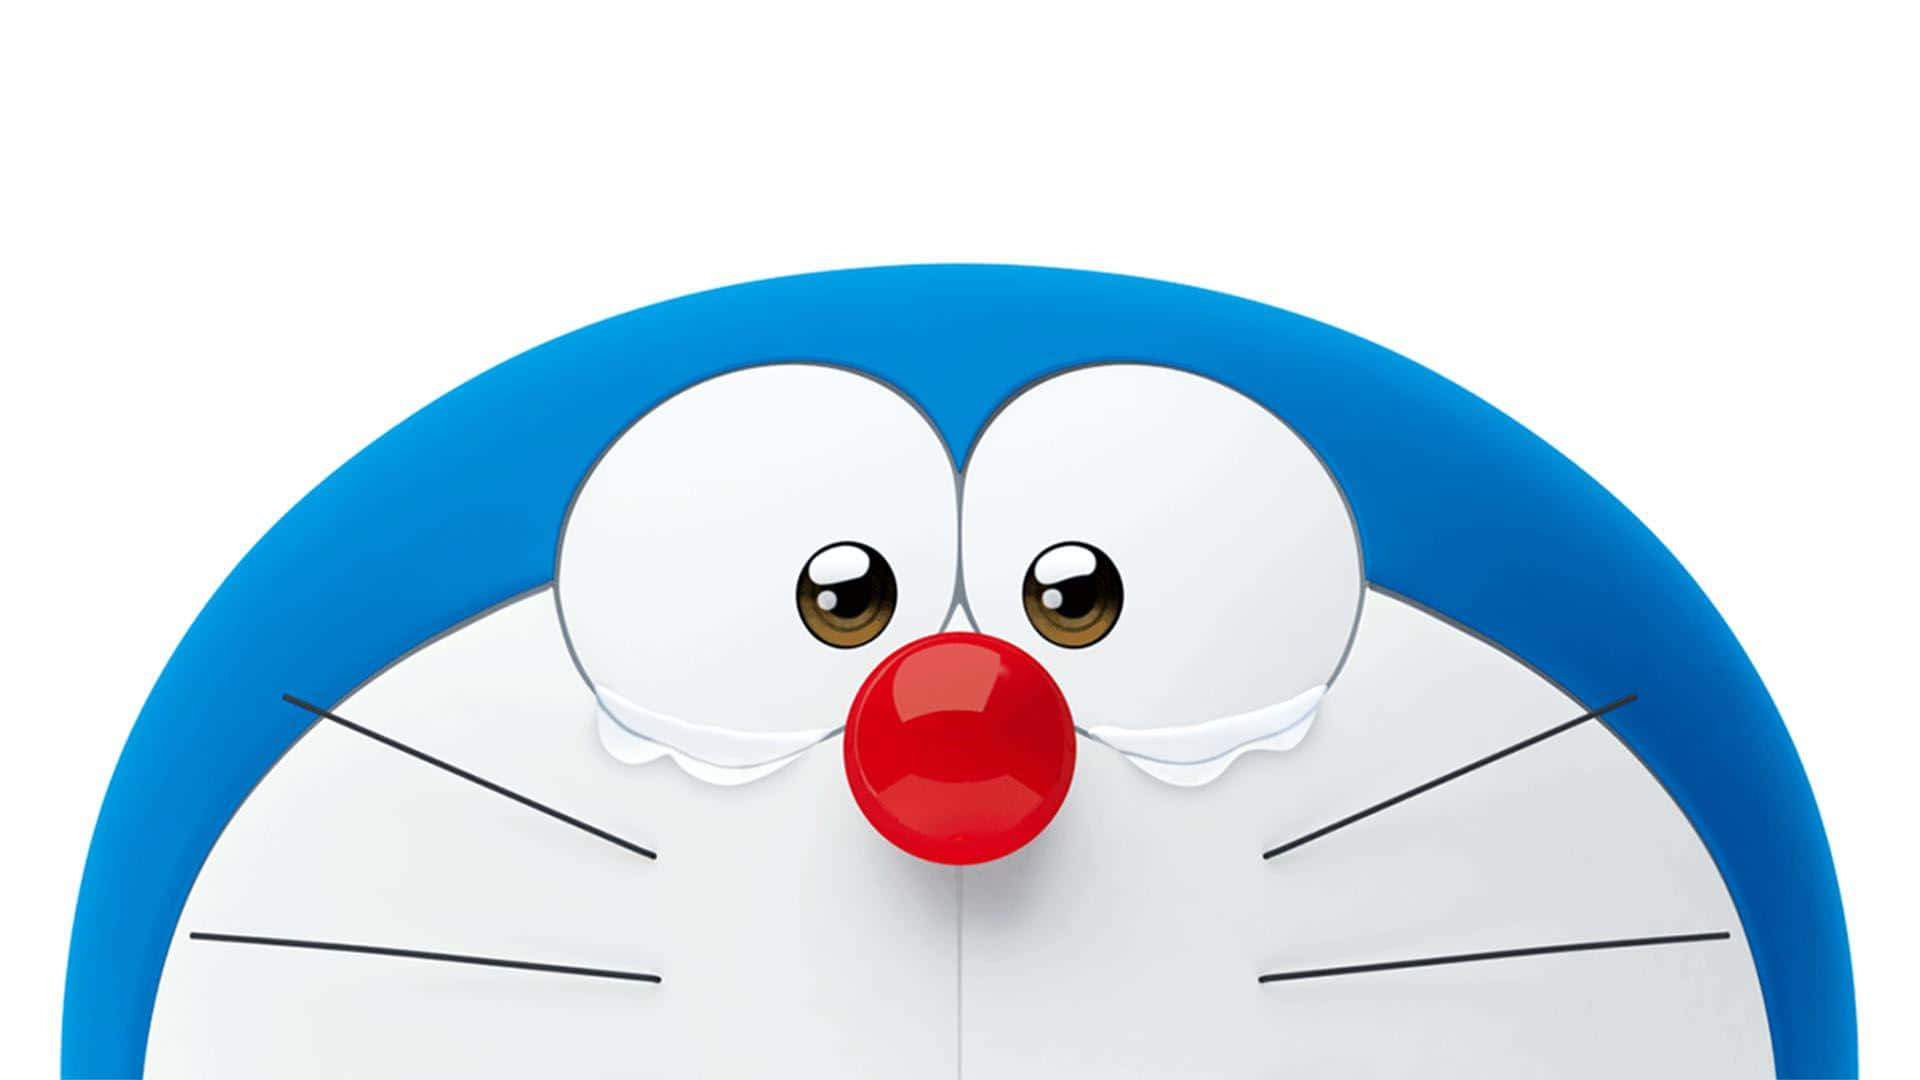 Doraemon stands proud with his iconic blue body and hat